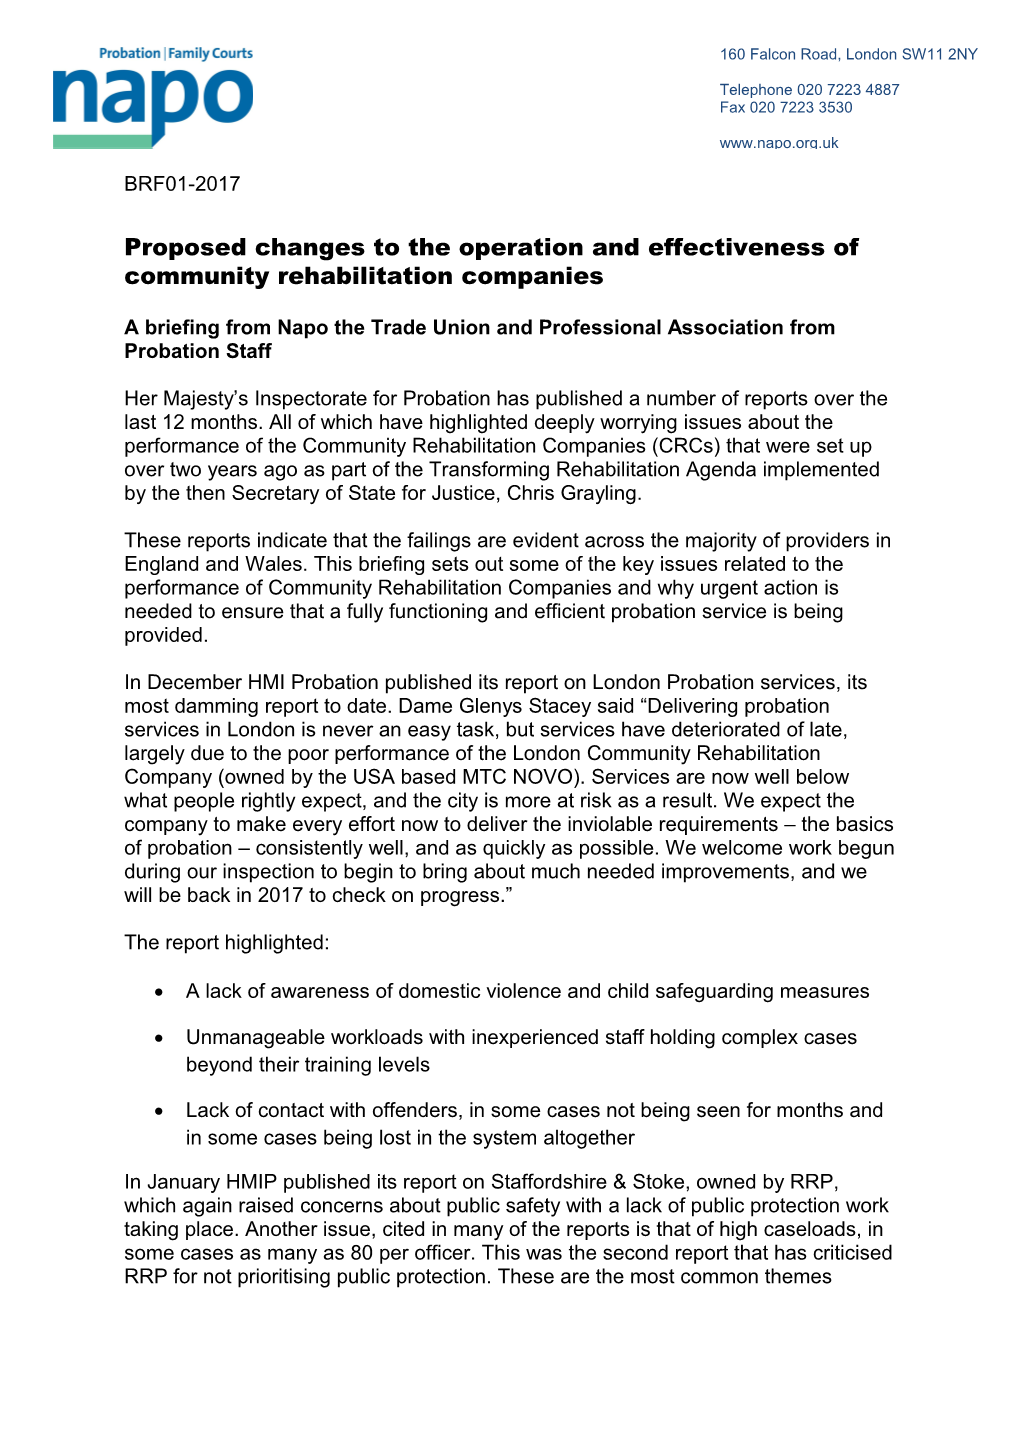 Proposed Changes to the Operation and Effectiveness of Community Rehabilitation Companies